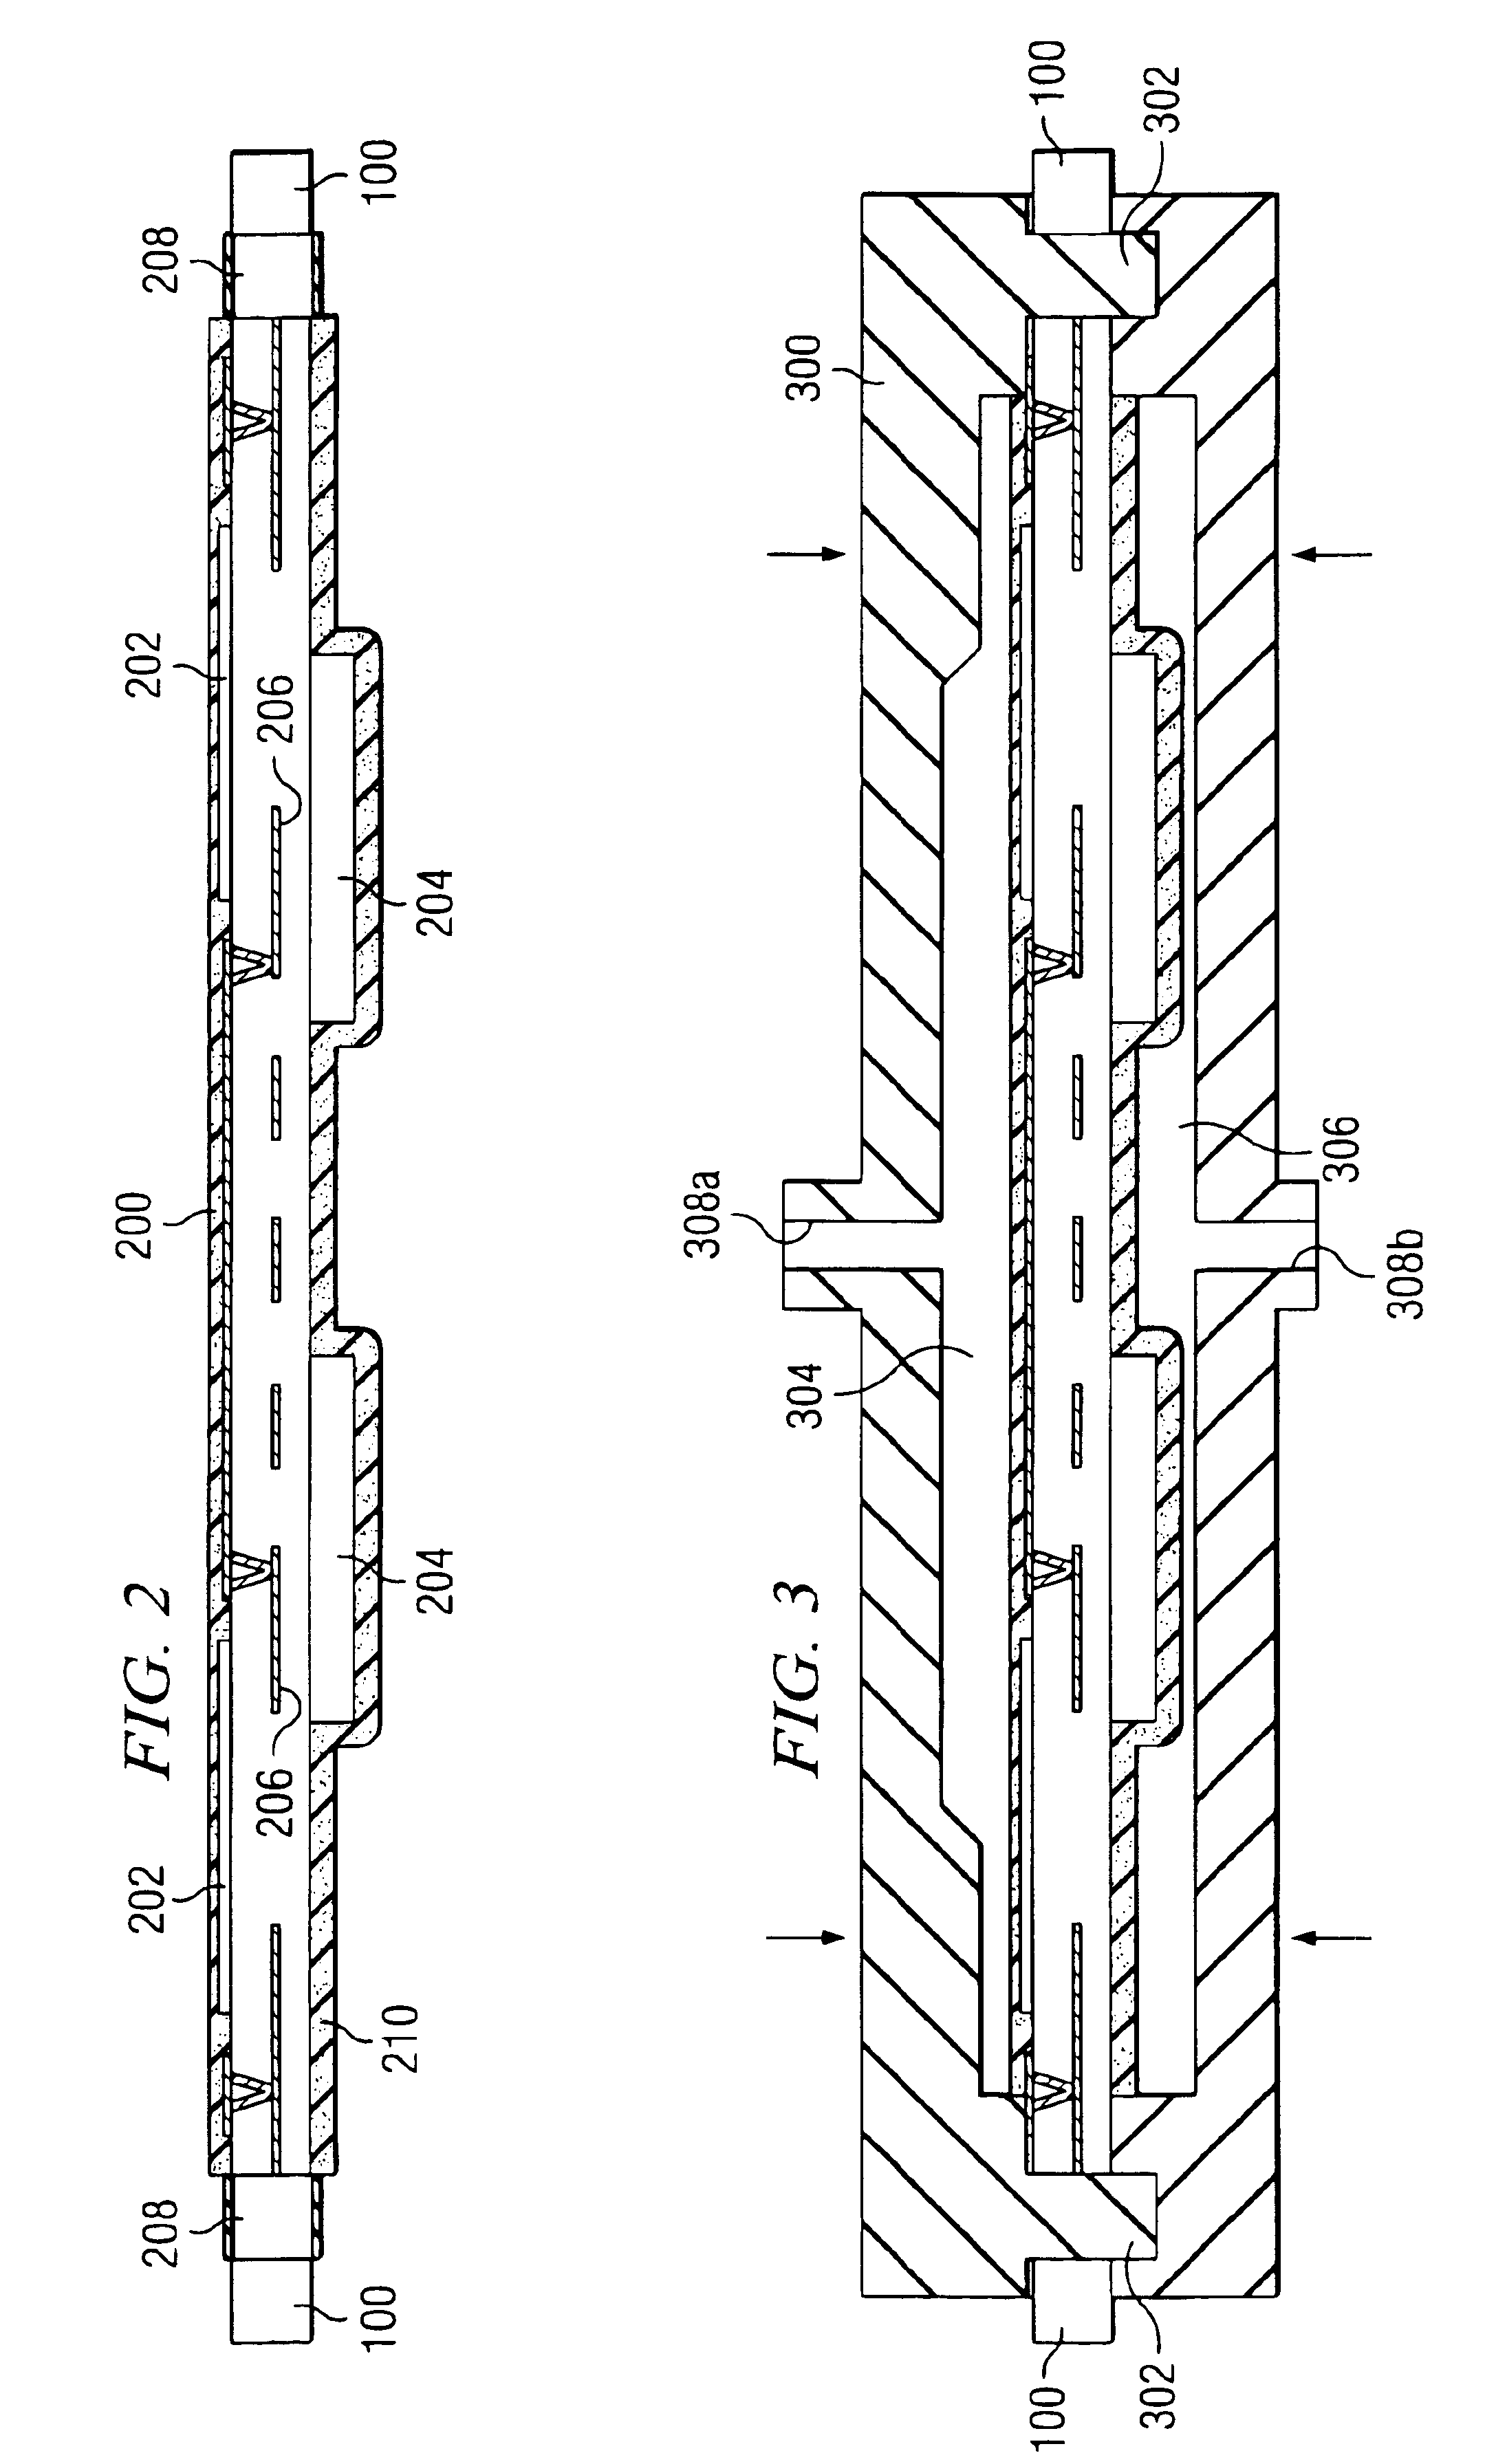 Method for forming an optical printed circuit board